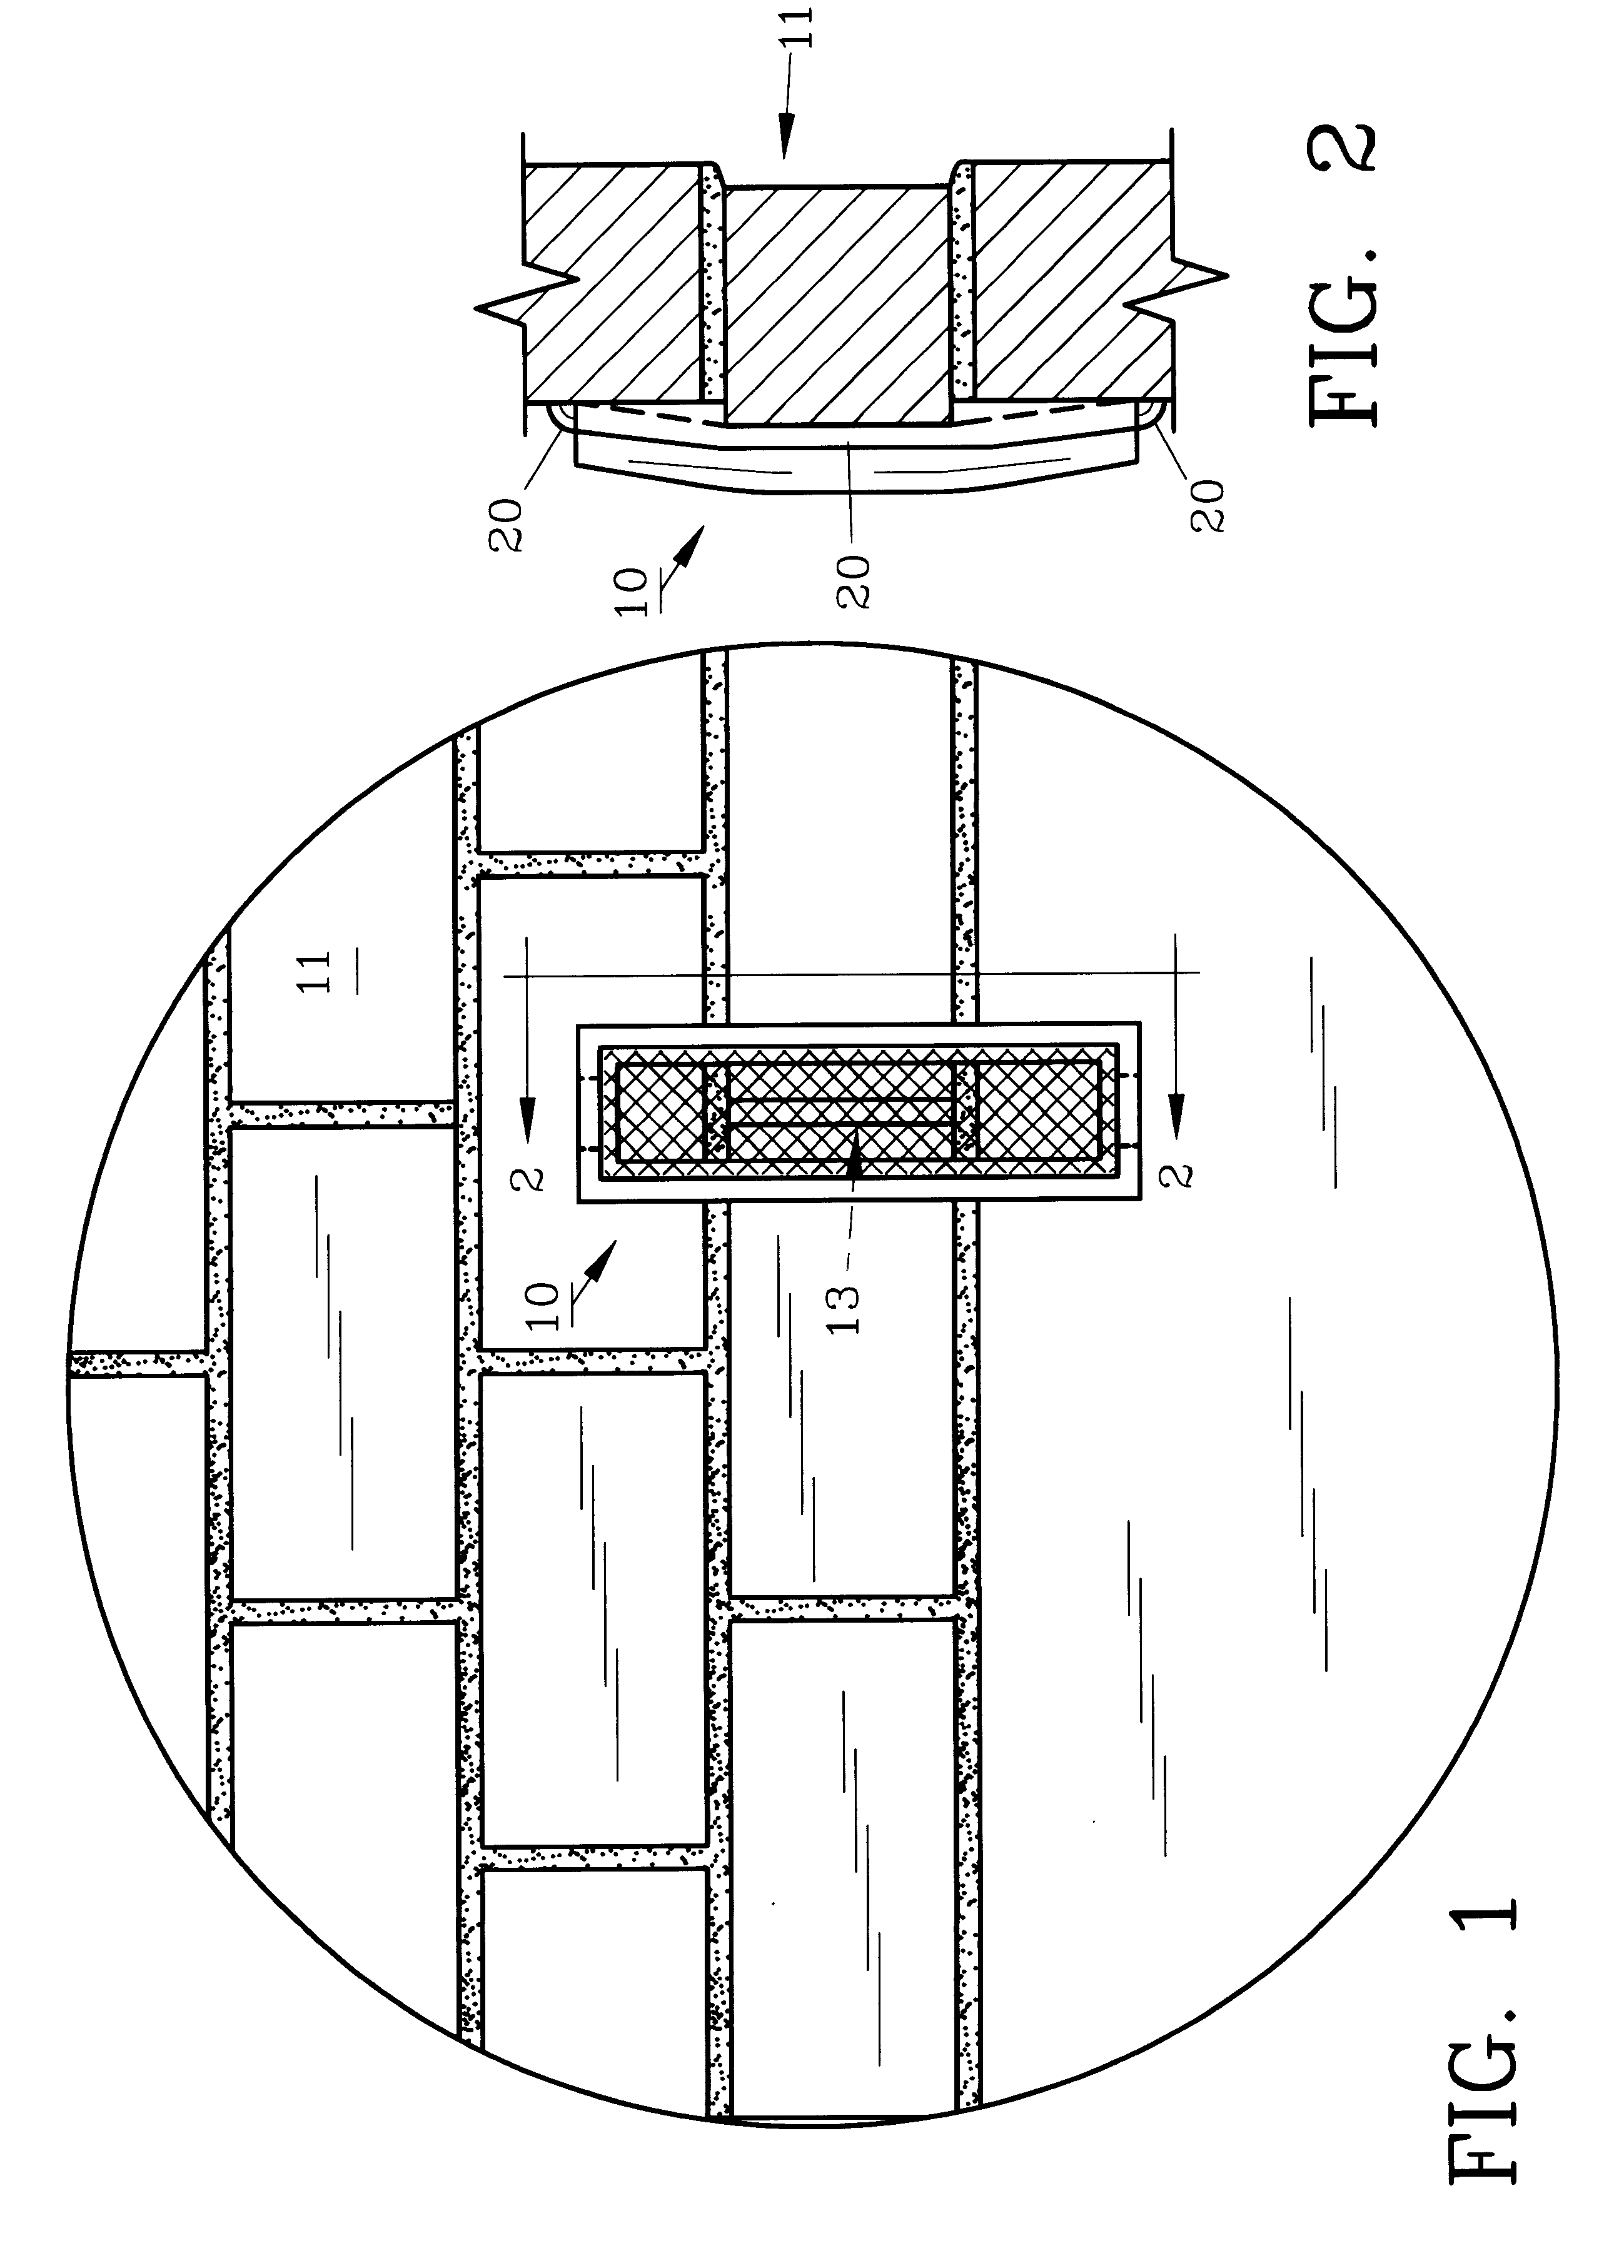 Weep hole screen device and method